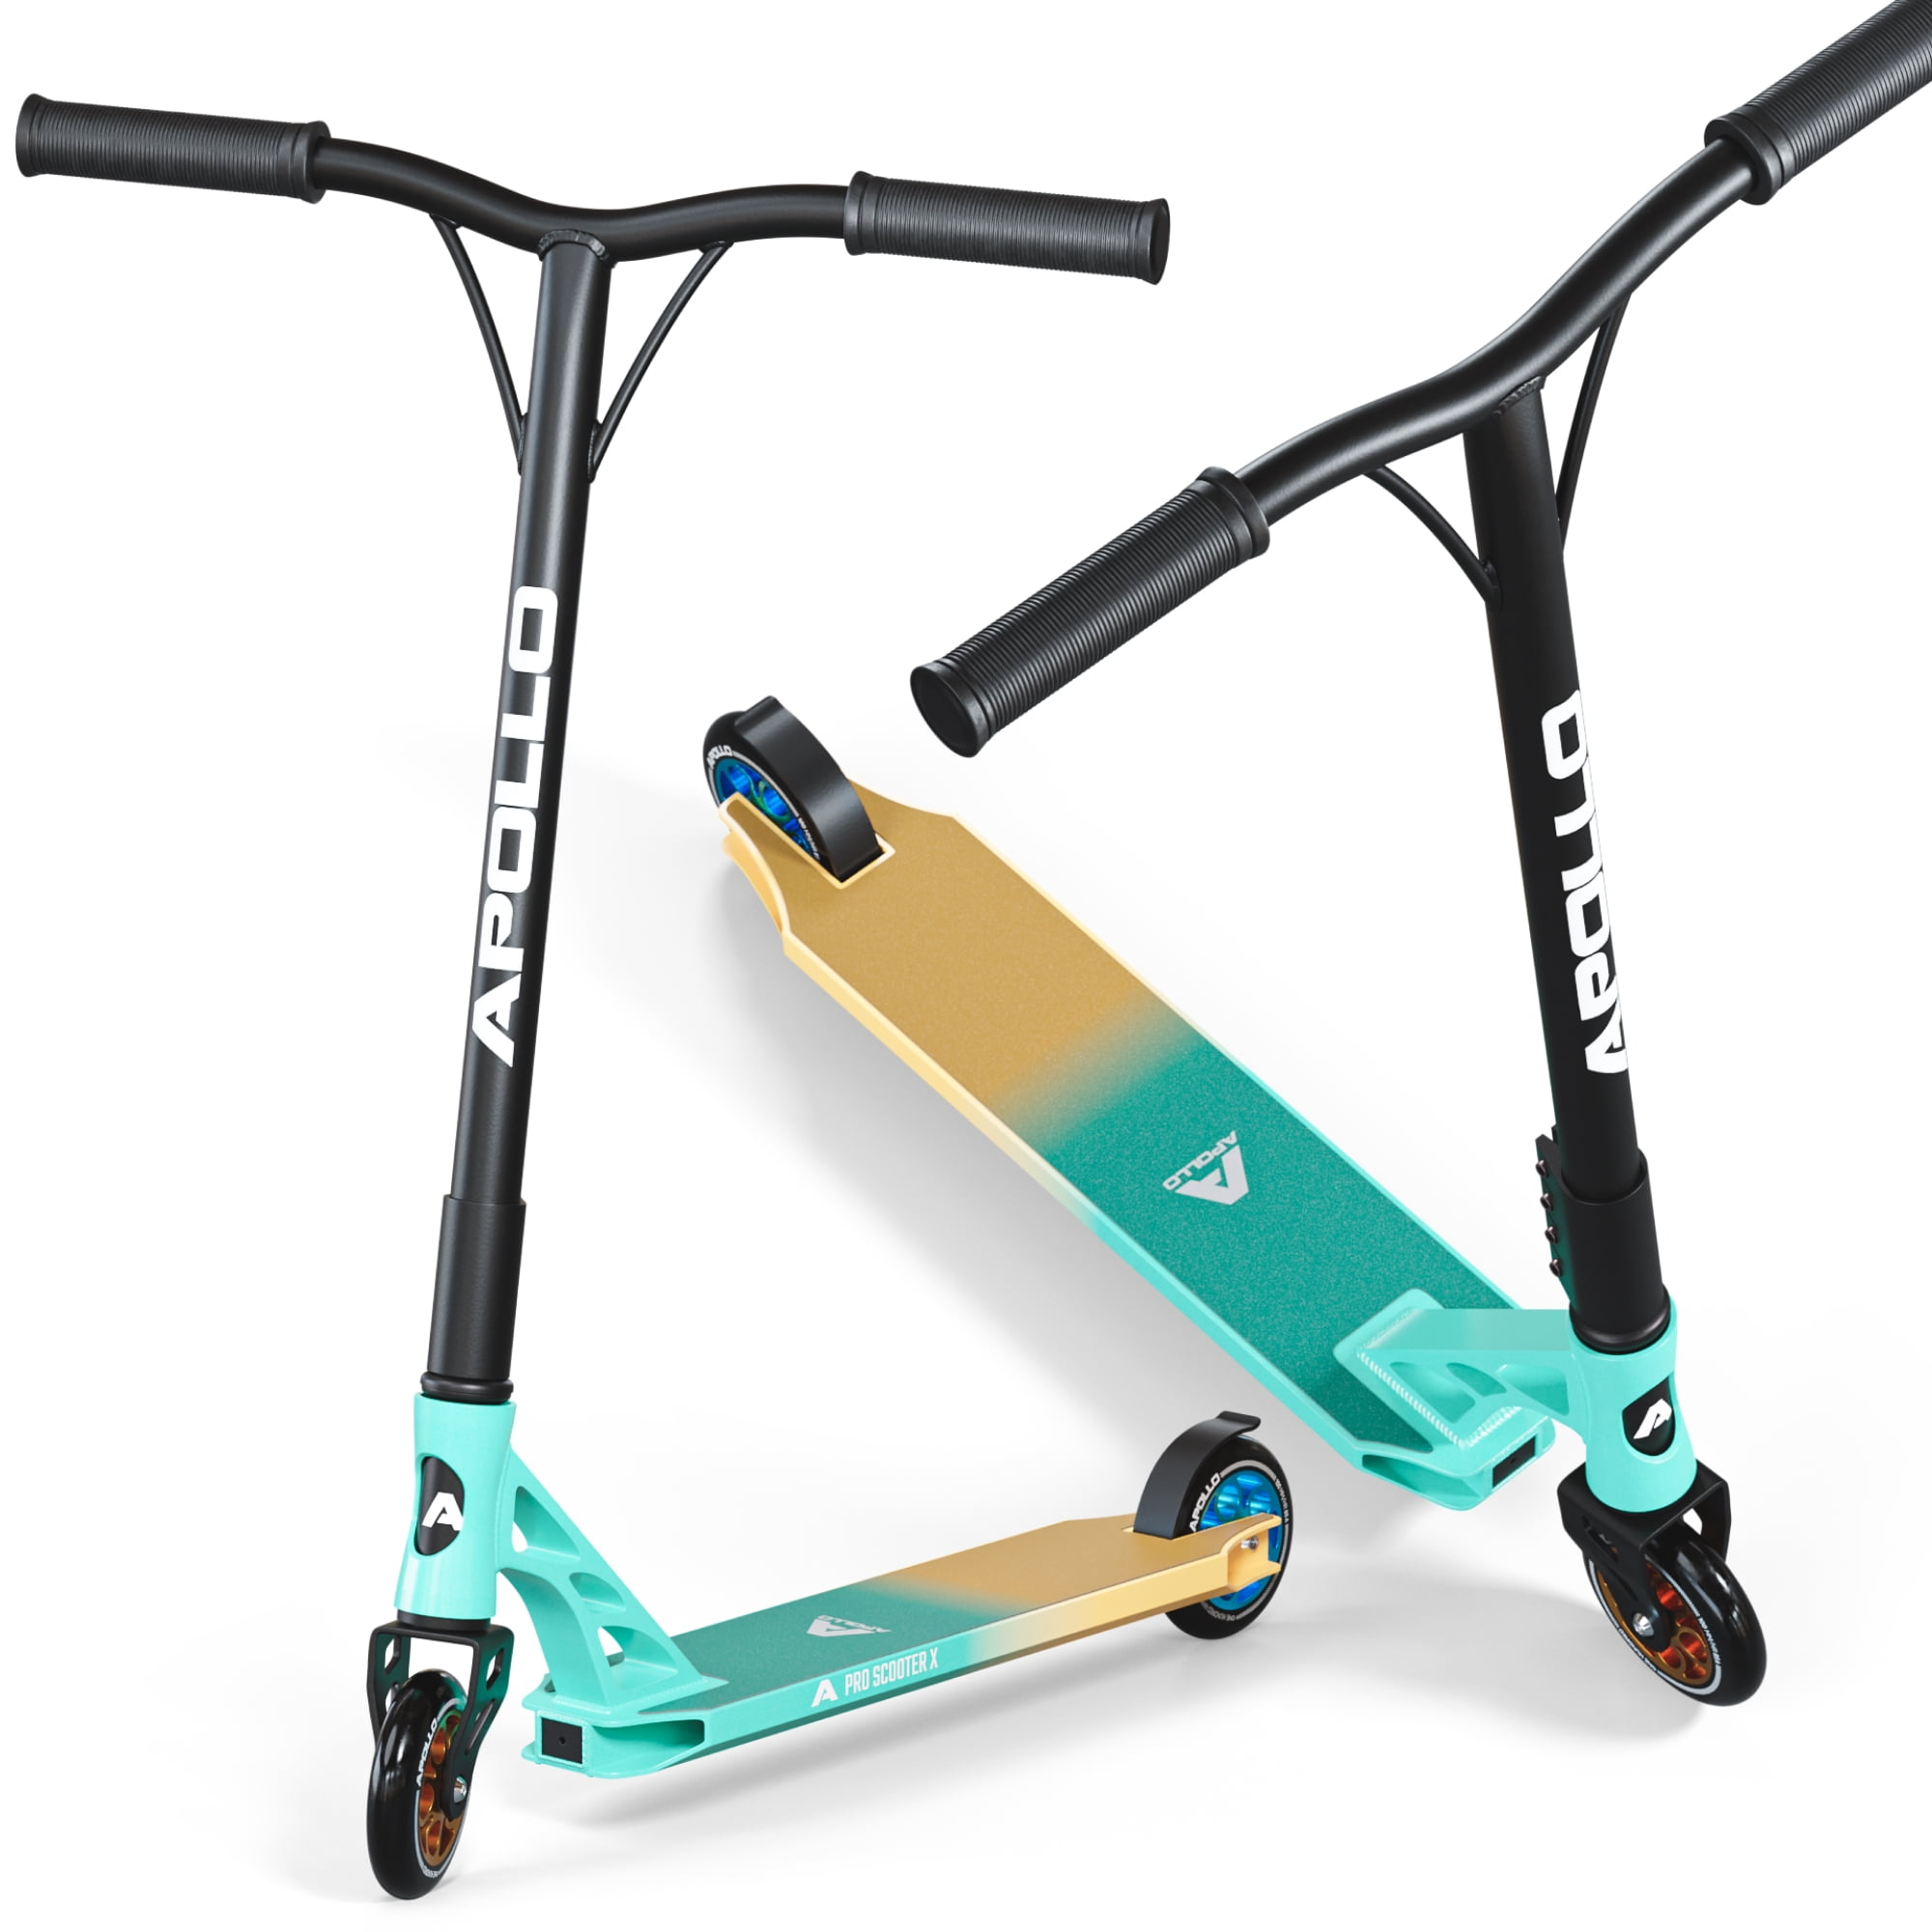 High End Stunt Scooter Cool Pro Scooter for Freestyle APOLLO Genesis X Pro Scooters Tricks & BMX Stunts Kids 10+, Teens, Adults Complete Trick Scooter for Advanced and Professional Riders 